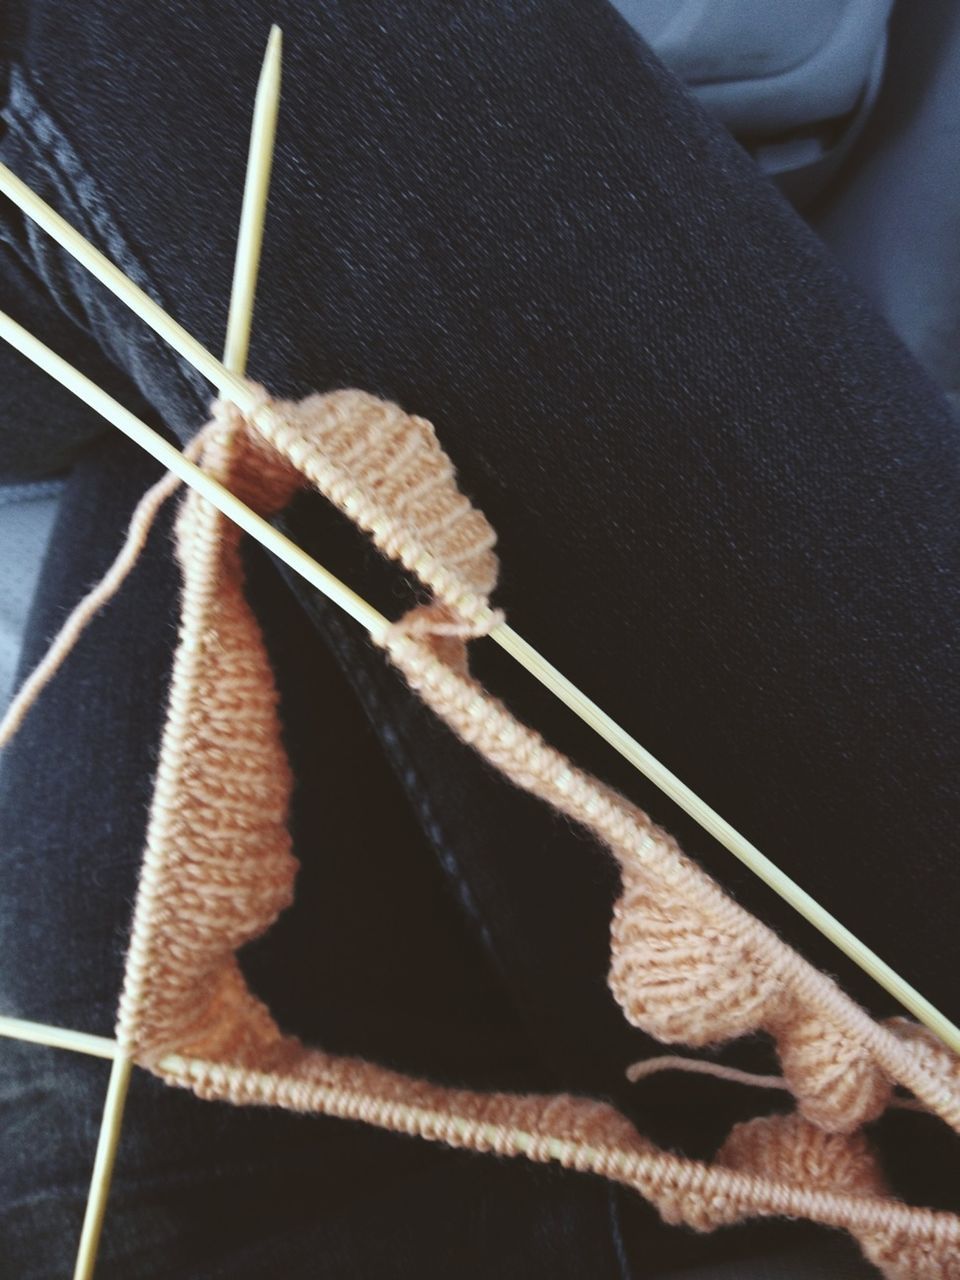 Close-up of wool and knitting needles on female lap